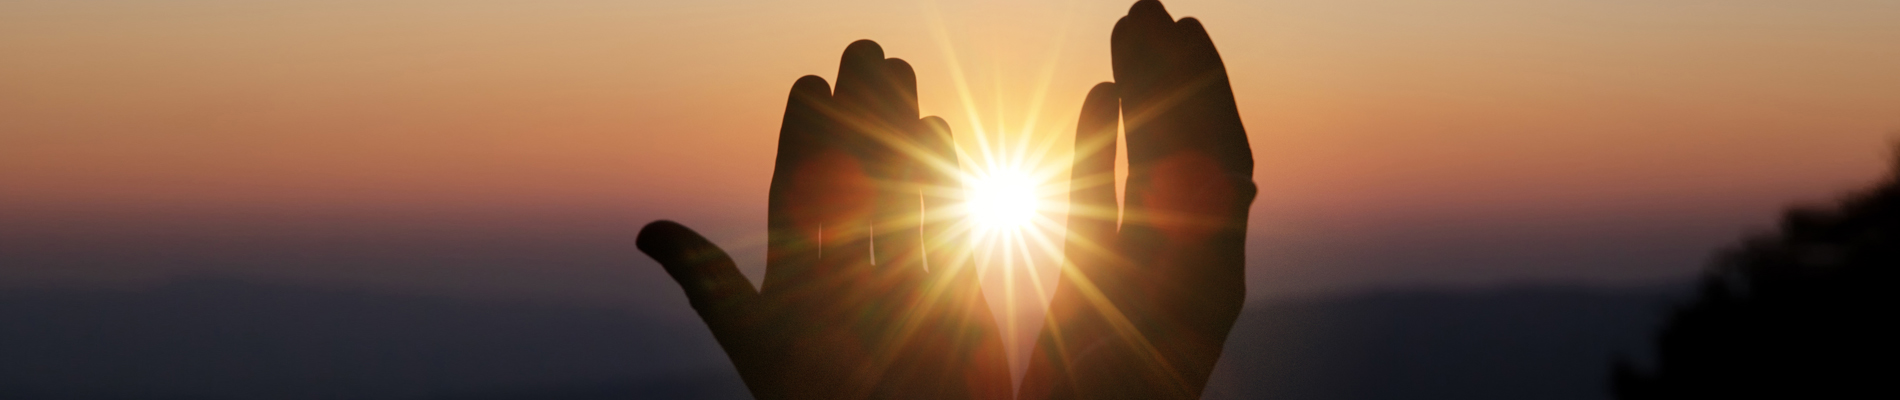 Two upright hands appearing to hold the setting sun